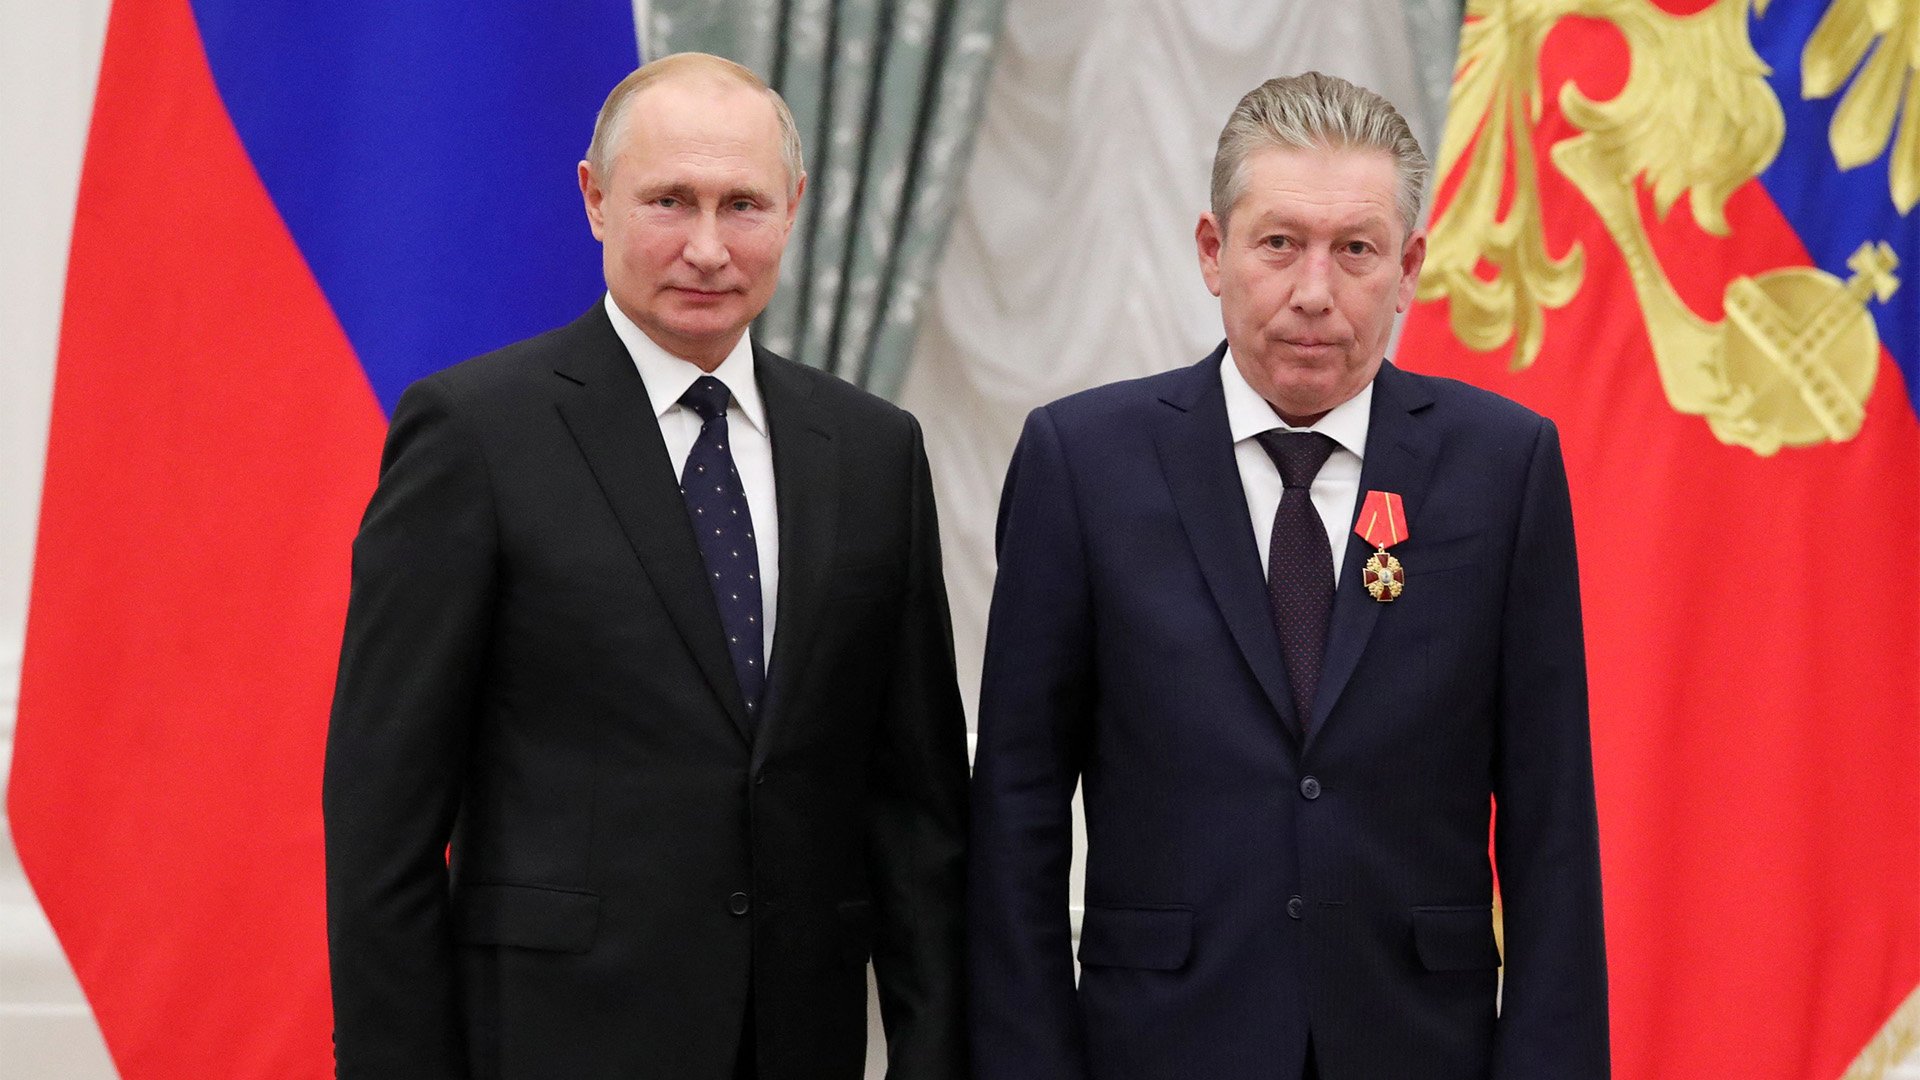 Russia's President Vladimir Putin, left, and Chairman of the Board of Directors of petroleum giant Lukoil, Ravil Maganov, pose for a photo during a Kremlin award ceremony on Nov. 21, 2019, less than three years before the CEO publicly criticized Putin's war in Ukraine. Photo by Mikhail Klimentyev/Sputnik/AFP via Getty Images.